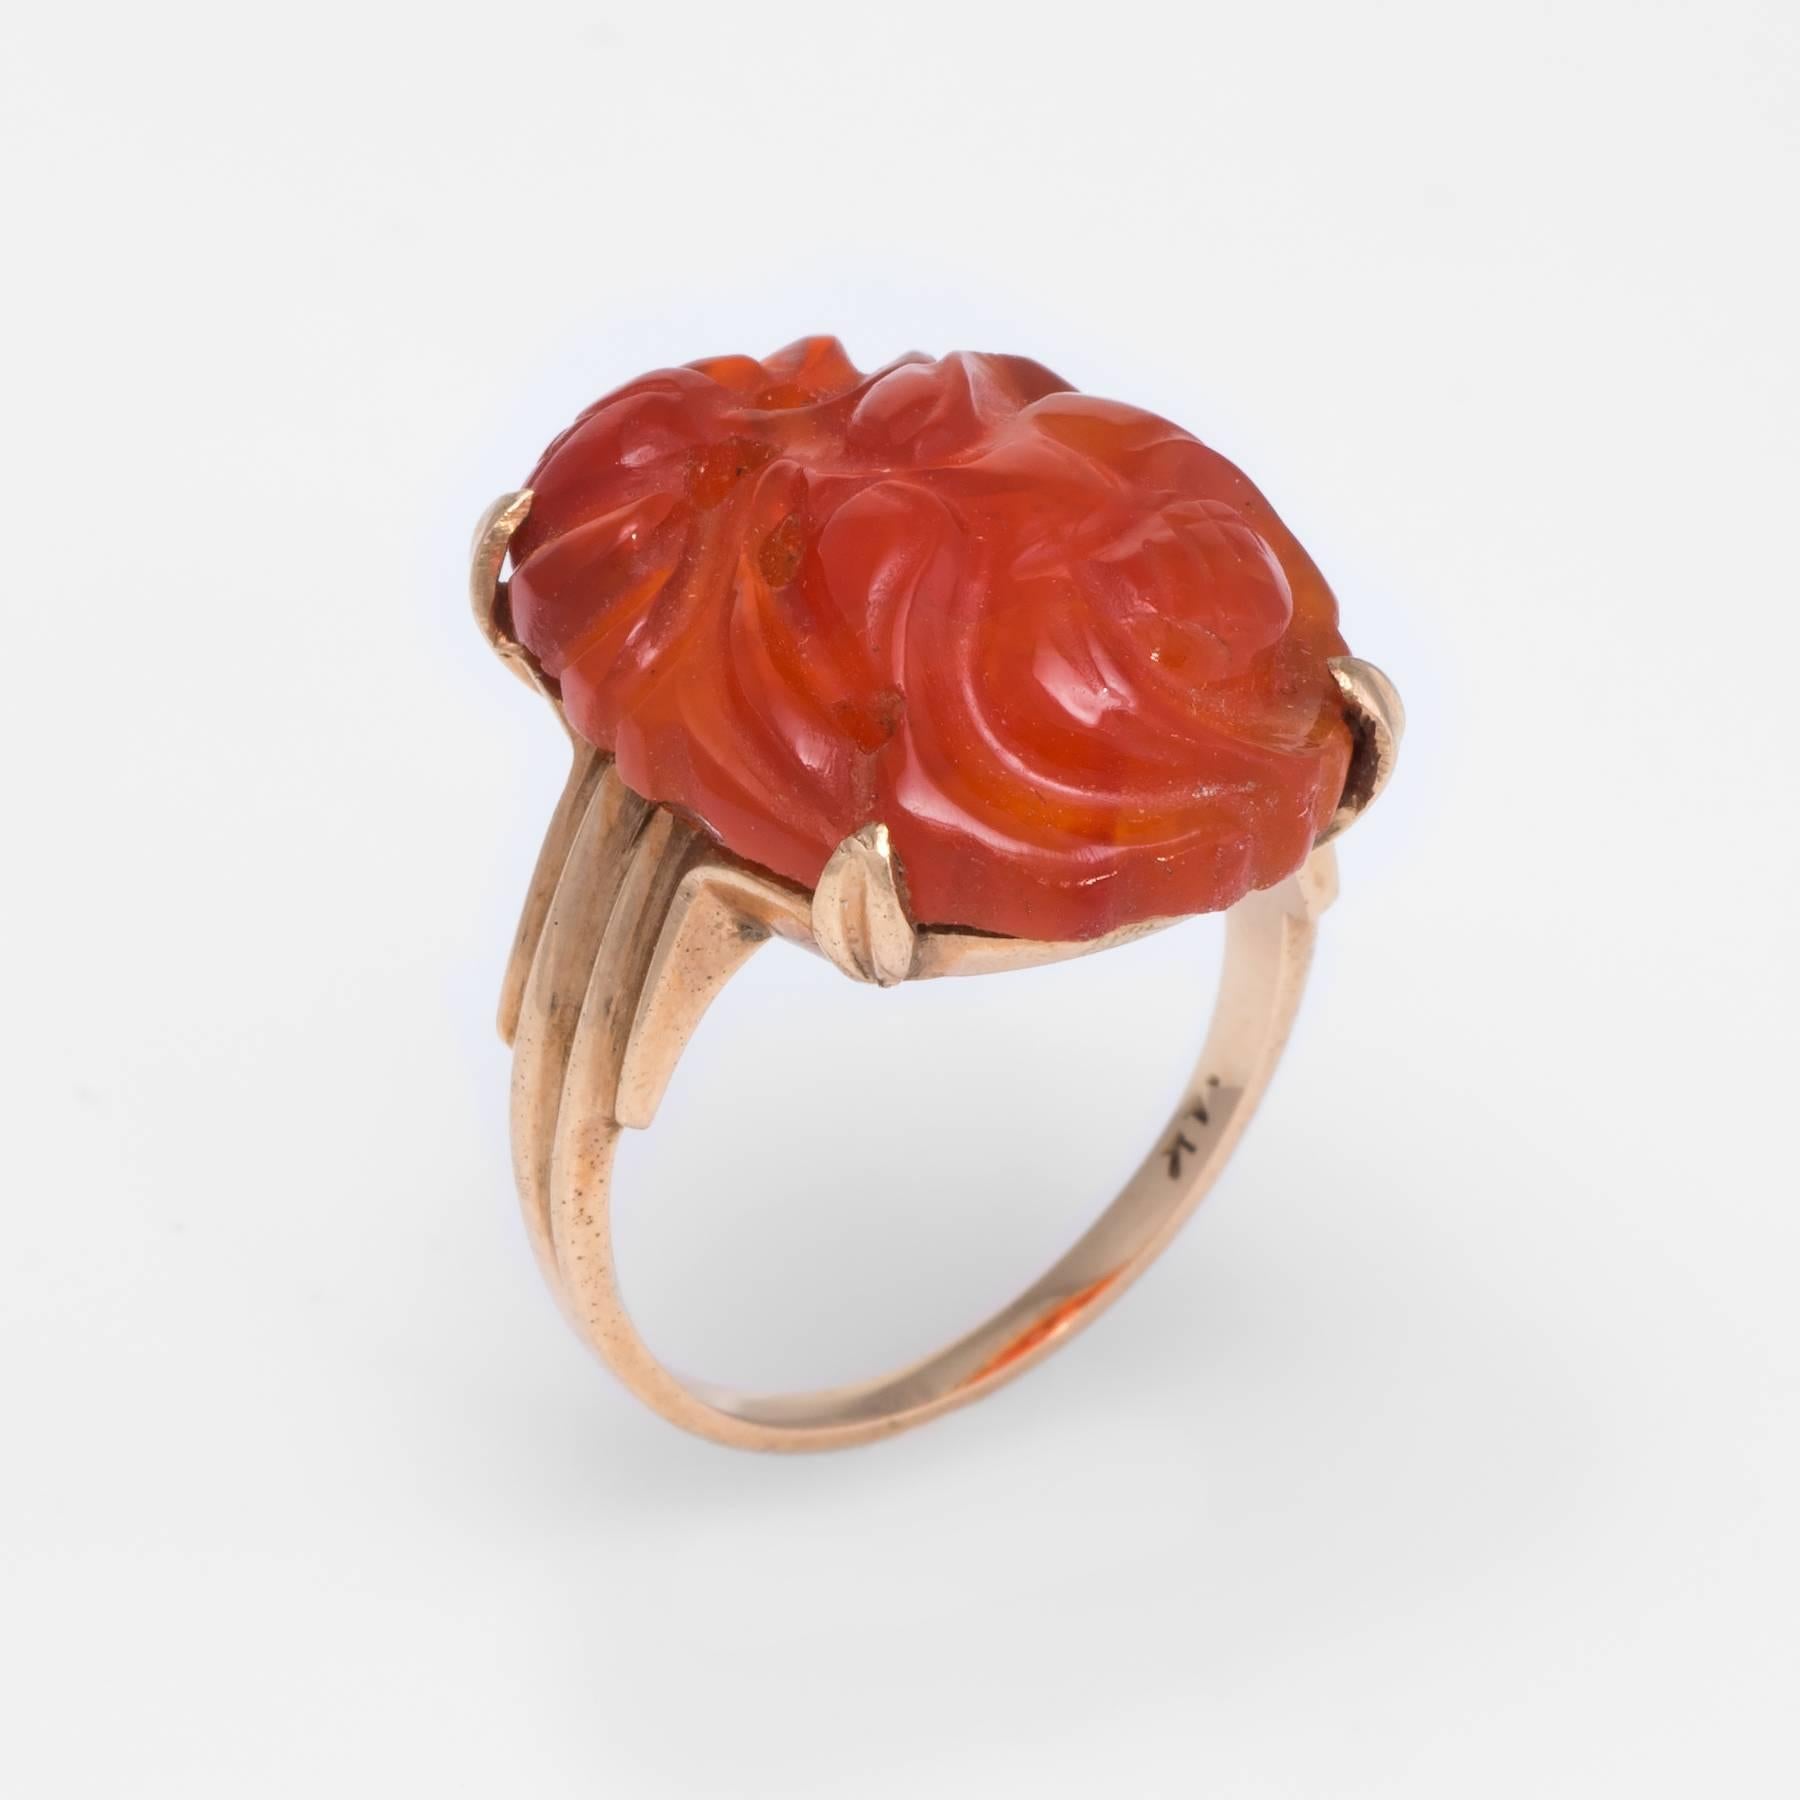 Elegant antique Art Deco era ring (circa 1920s to 1930s), crafted in 14 karat yellow gold. 

Carved carnelian measures 20mm x 18mm.

The ring is in excellent condition. 

Particulars:

Weight: 4.4 grams

Stones:  Carved carnelian measures 20mm x